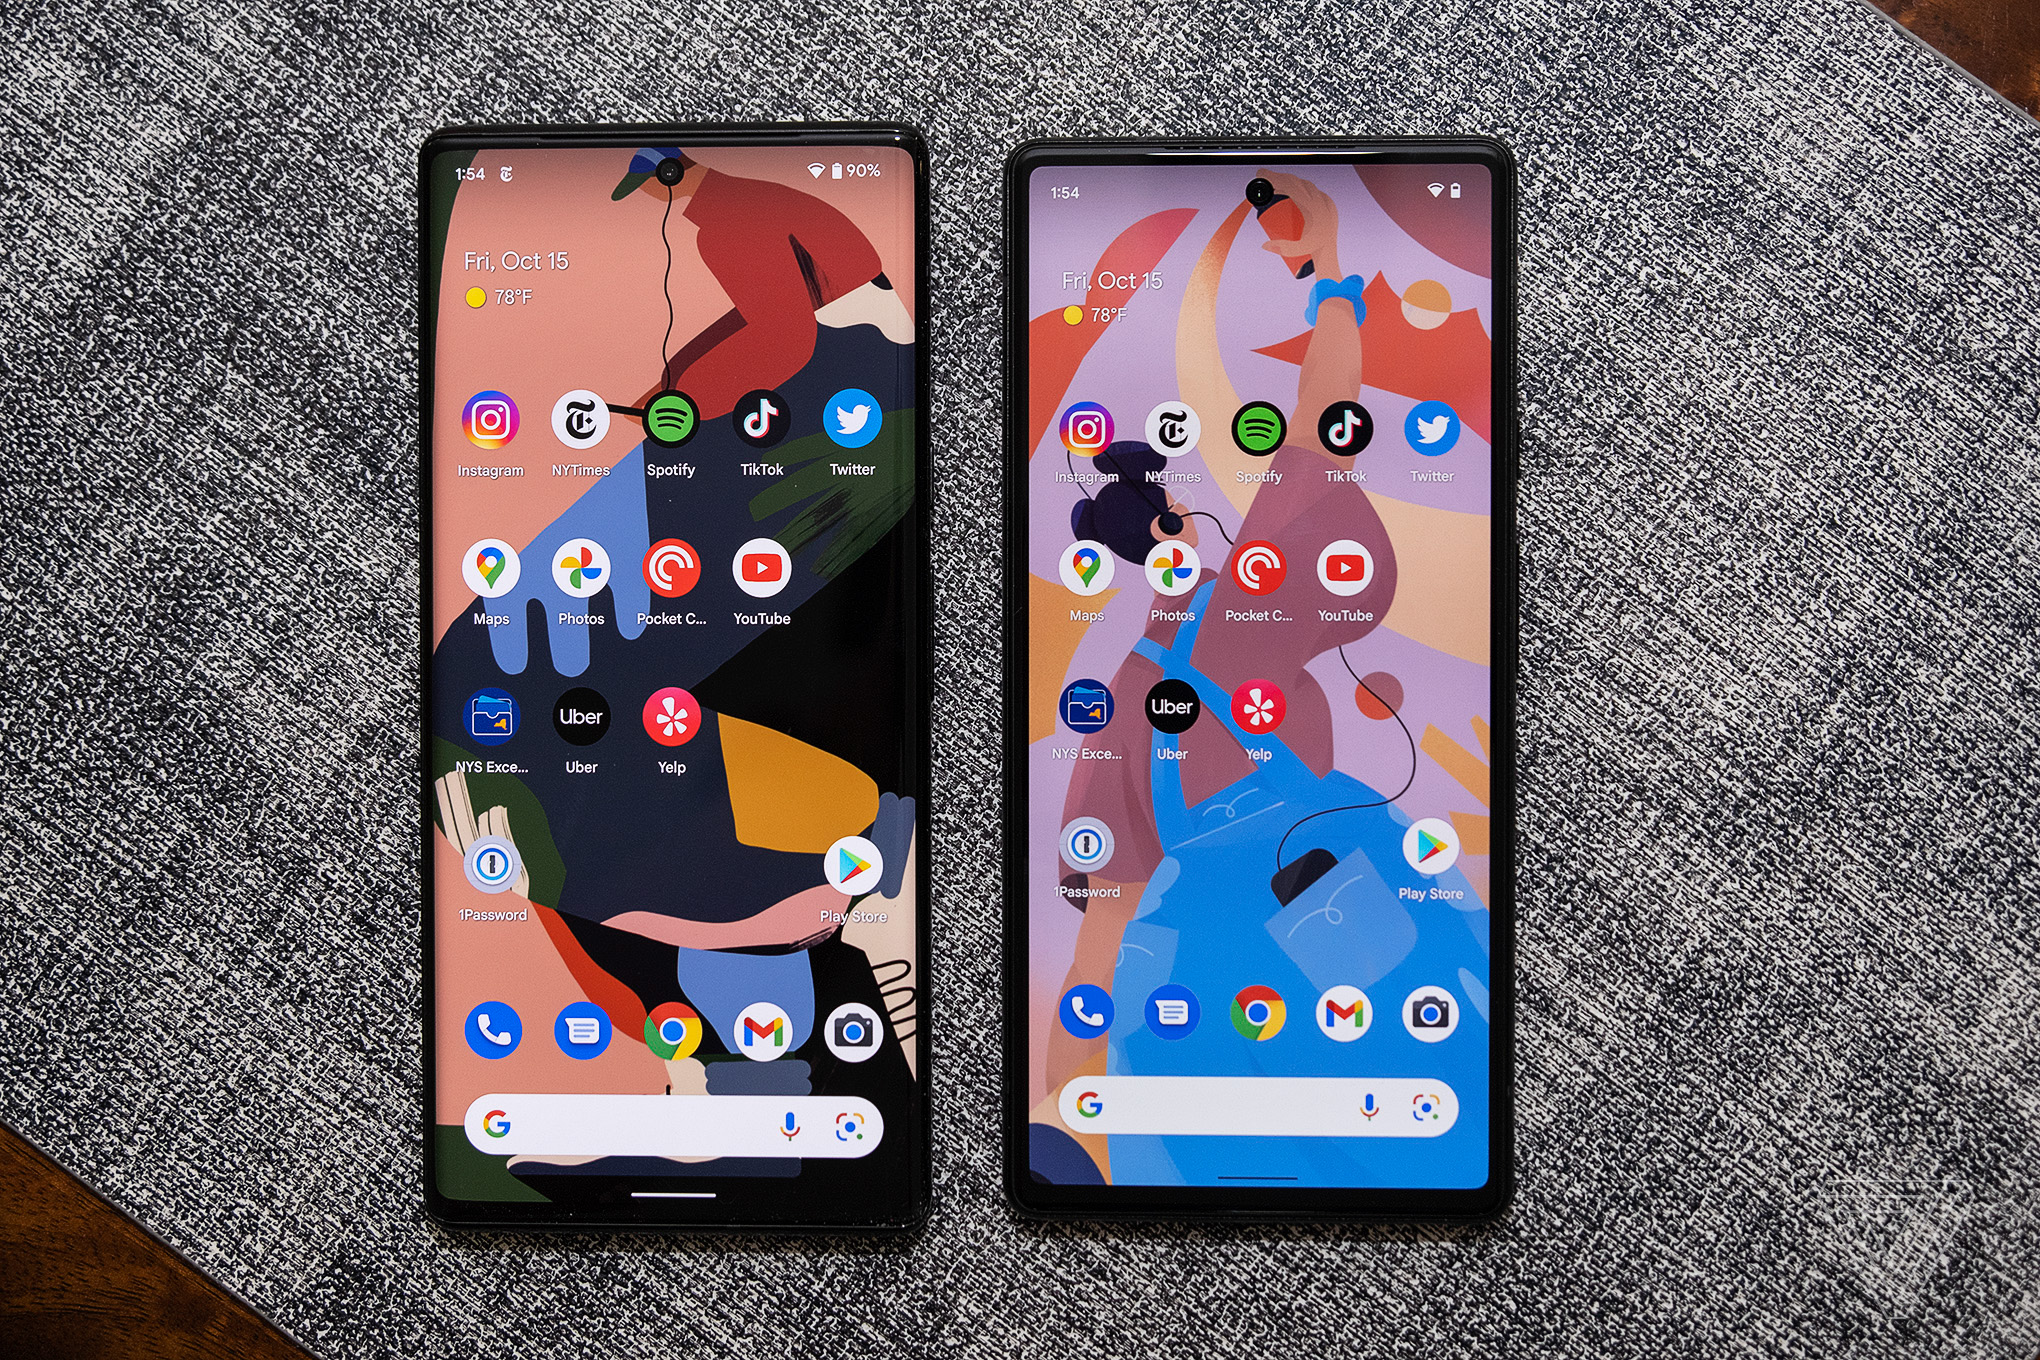 No hassle-free update: Google disabled unique Pixel 6 and Pixel 6 Pro features due to Android 12 bugs